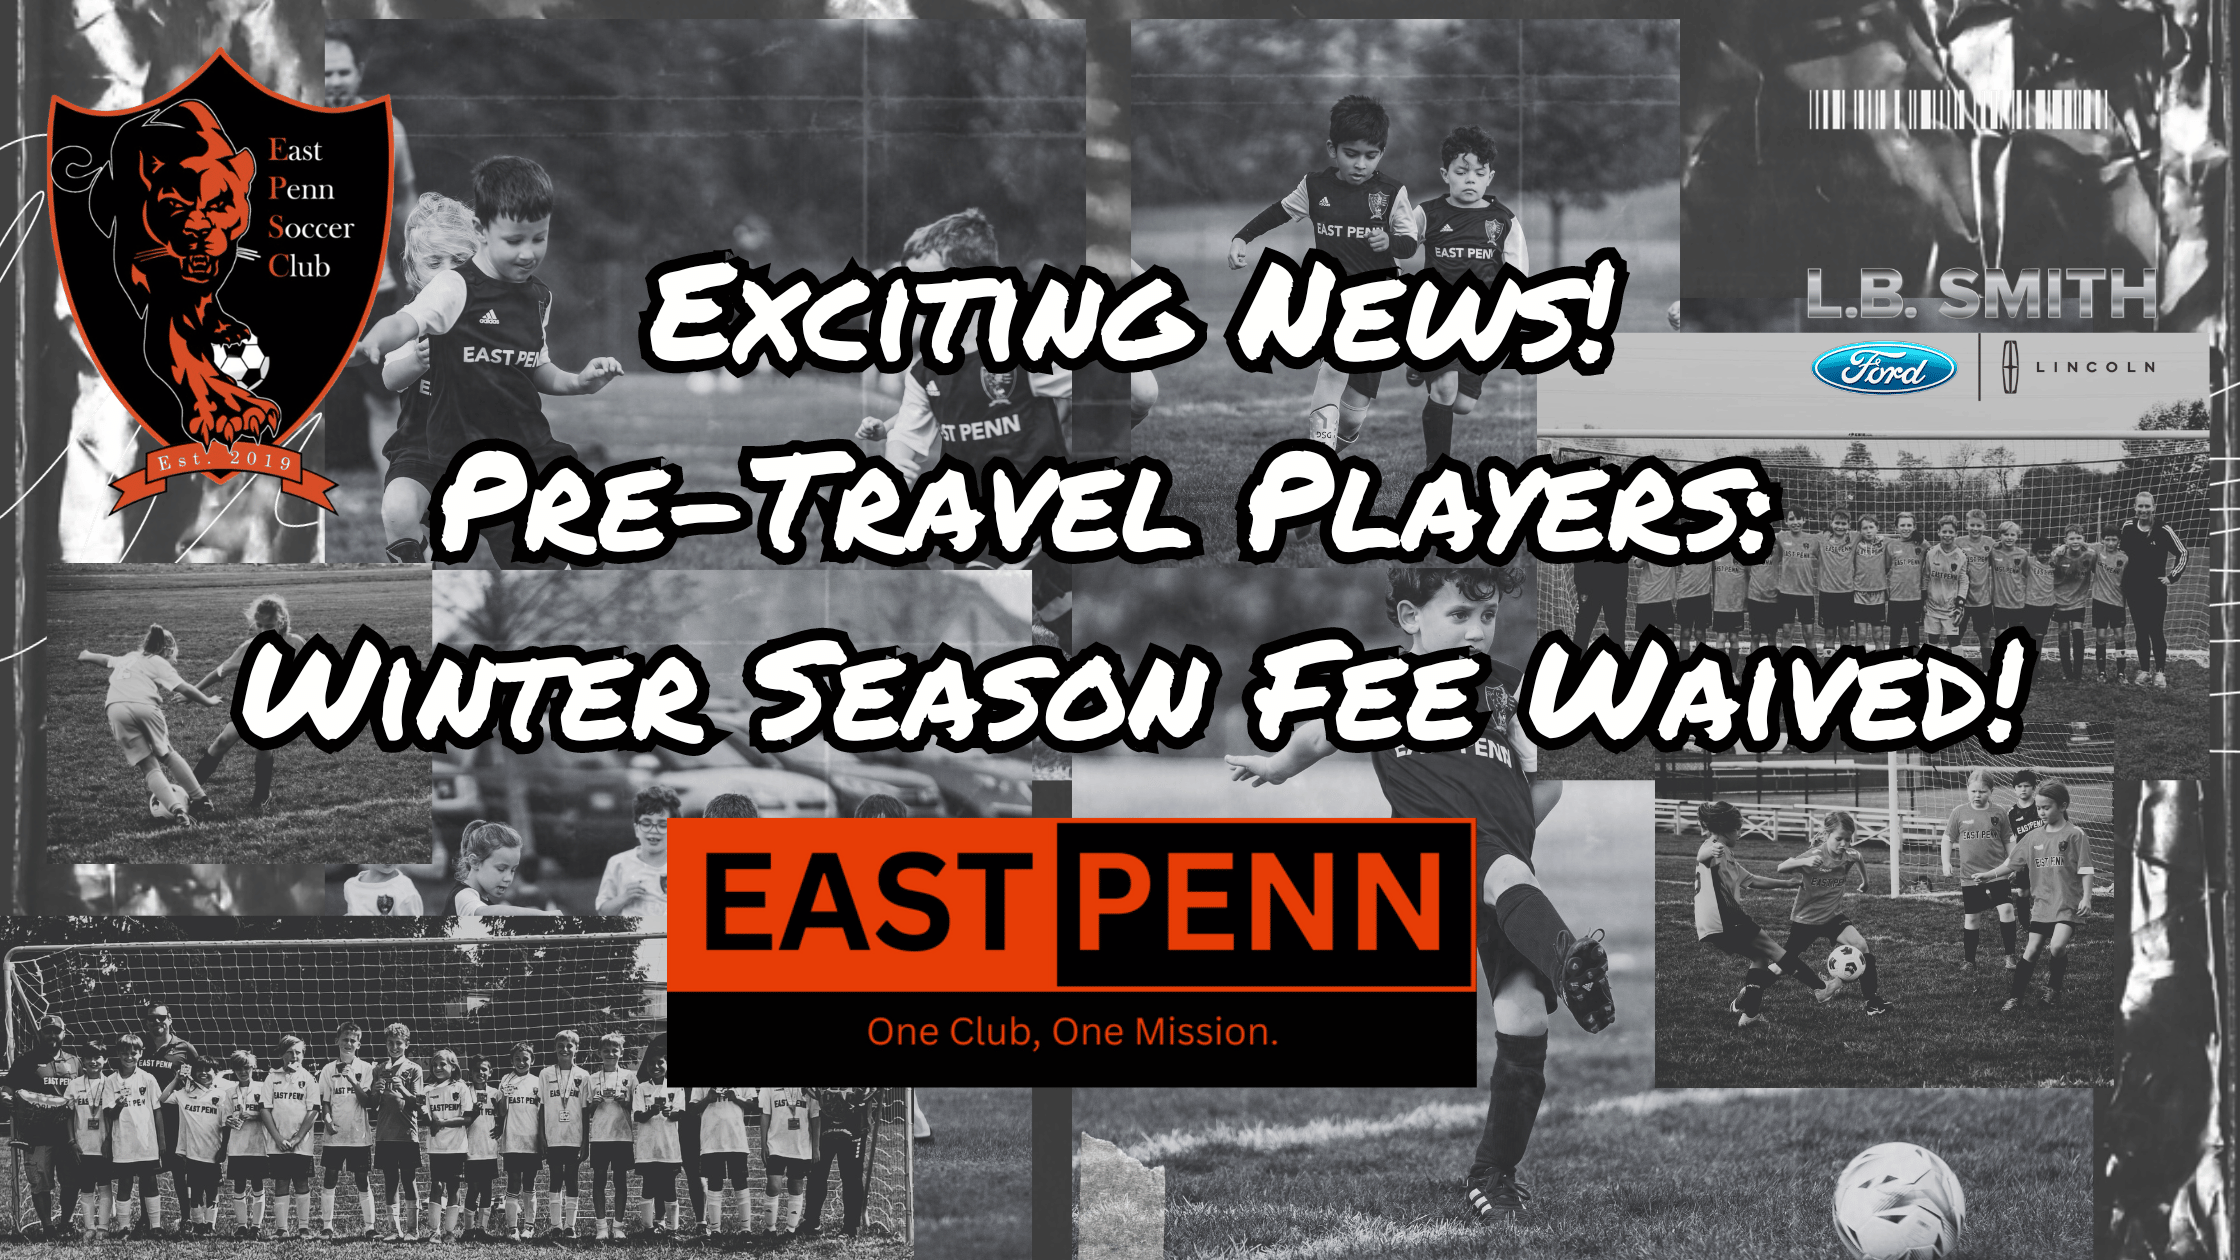 Exciting News for Pre-Travel Players: Winter Season Fee Waived!